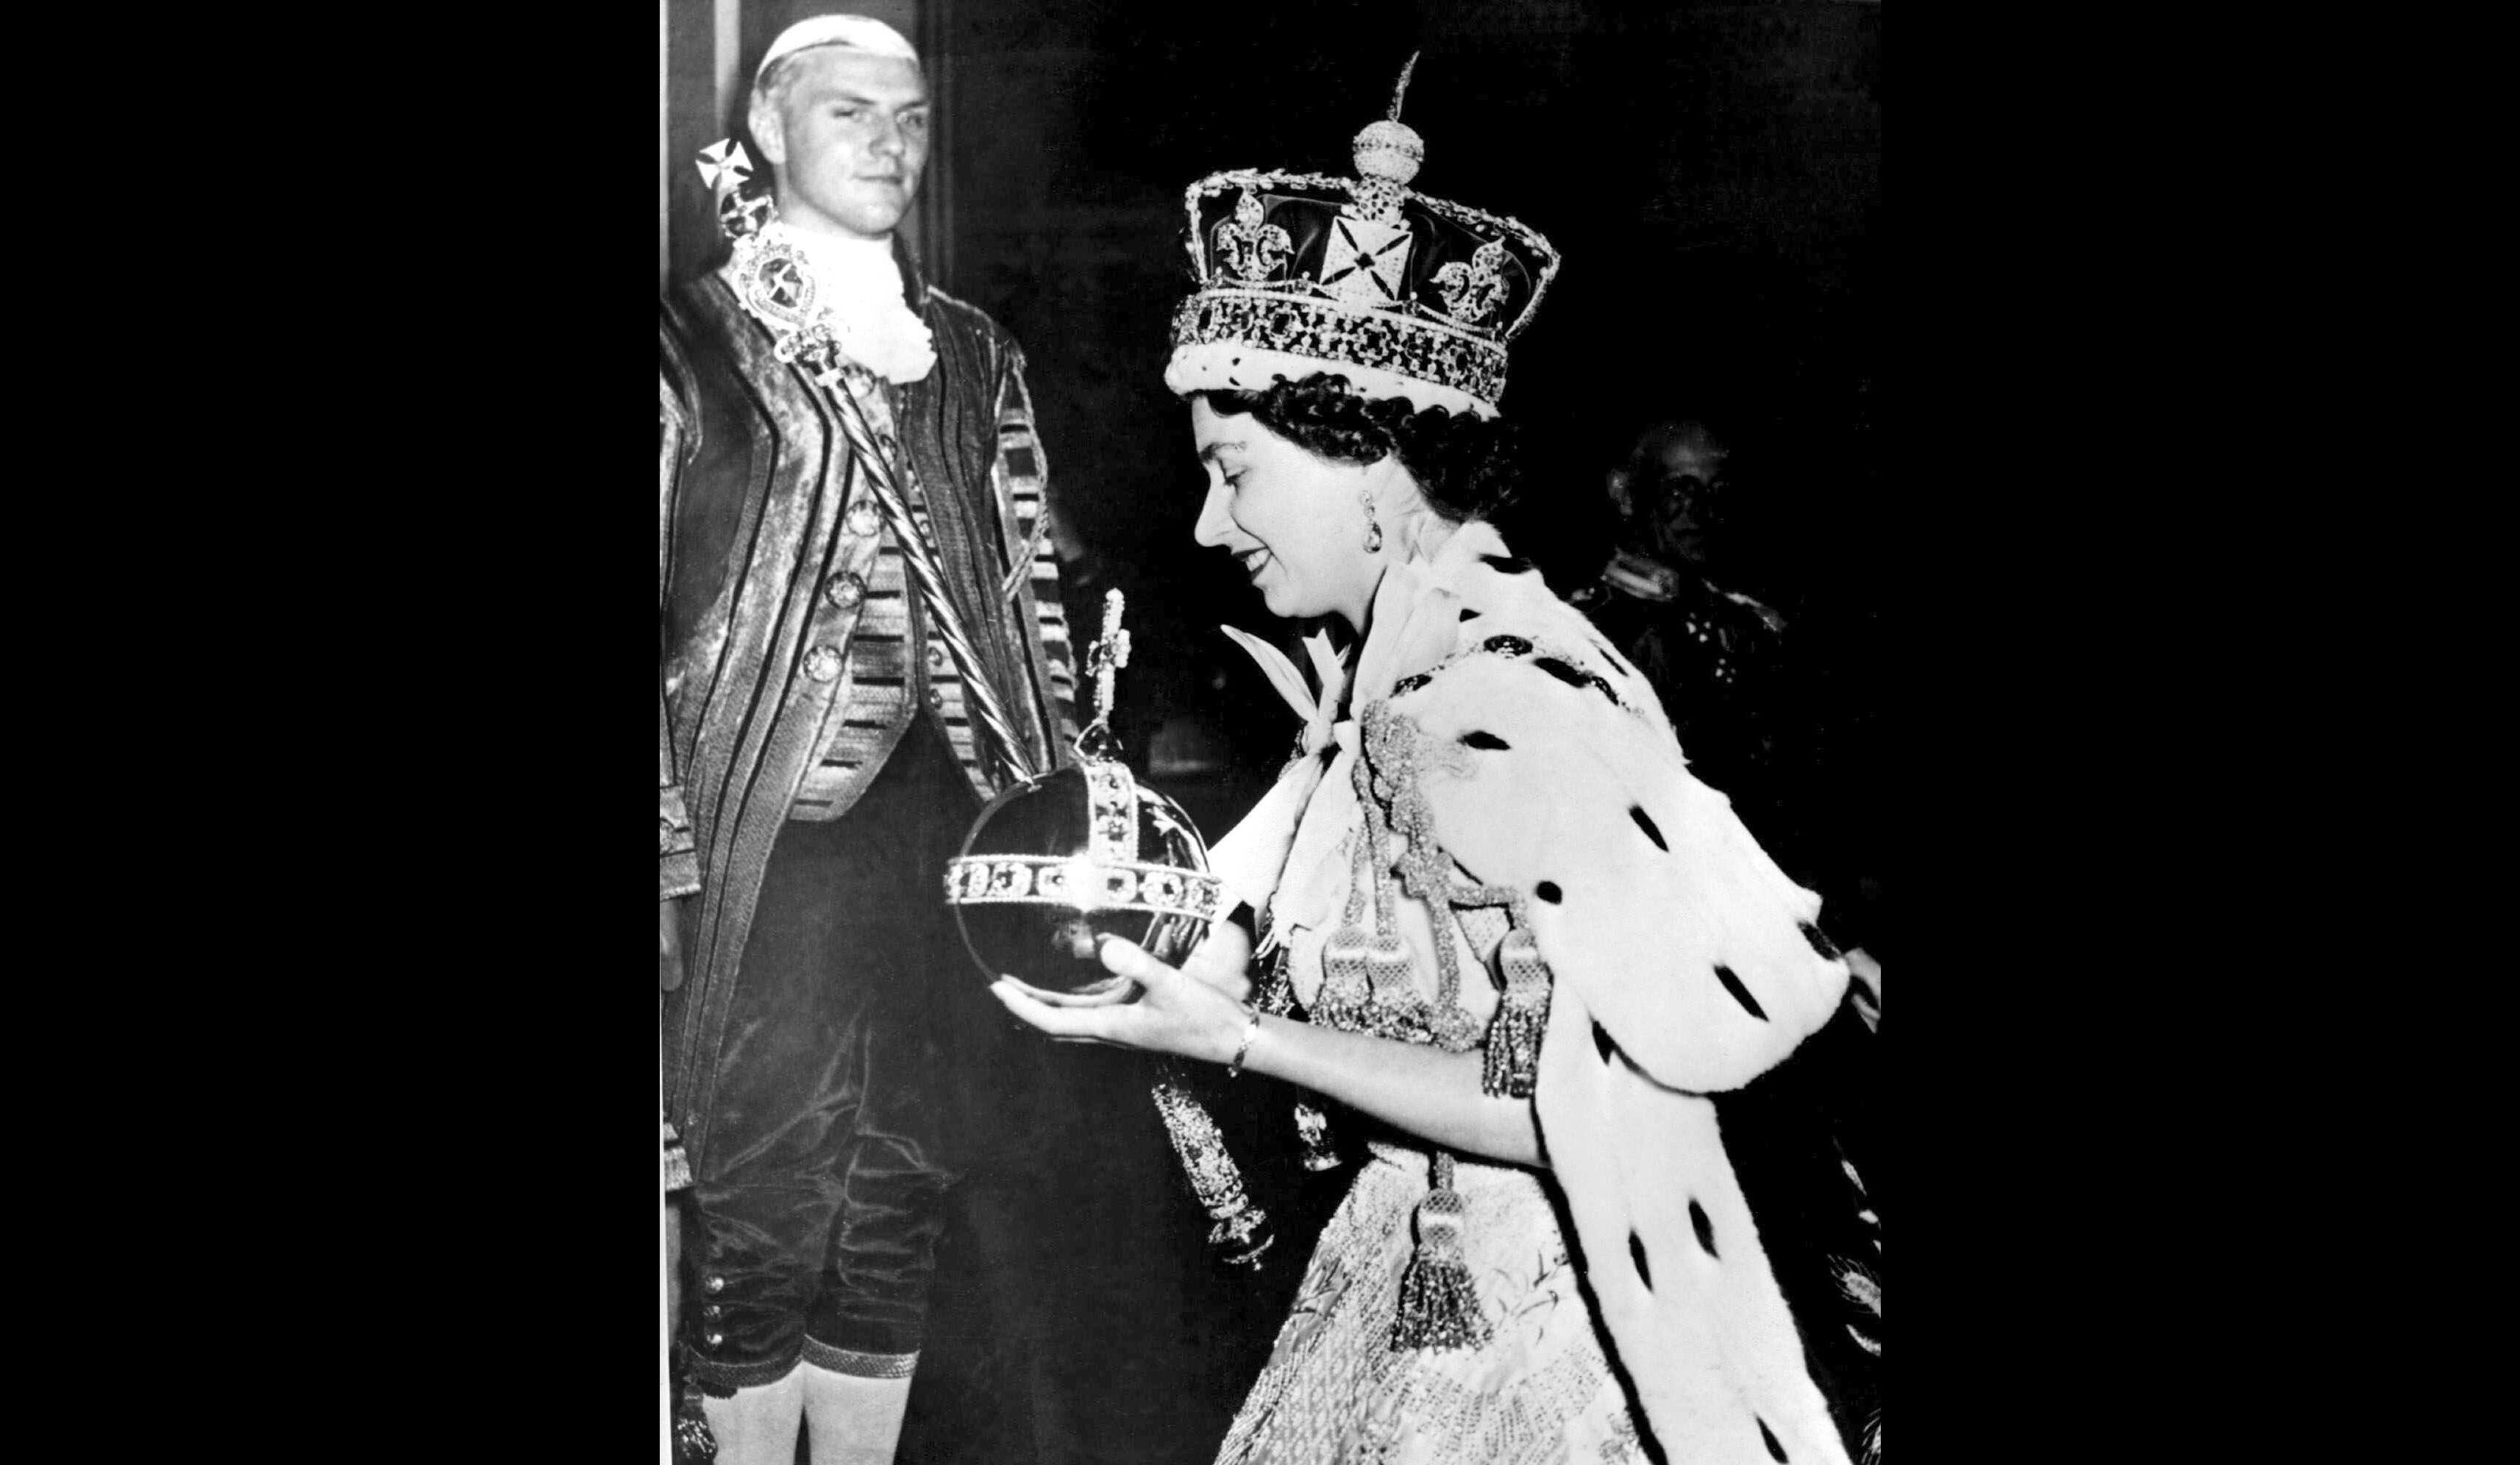 FILE - In this June 2, 1953 file photo, Britain's Queen Elizabeth II wearing the bejeweled Imperial Crown and carrying the Orb and Scepter with Cross, leaves Westminster Abbey, London, at the end of her coronation ceremony. Queen Elizabeth II reveals the secrets of giving a speech while wearing a weighty crown, in unusually candid comments that are part of a new documentary to be aired on the BBC on Sunday Jan. 14, 2017, on her coronation and the symbolism of the crown jewels. (AP Photo/File)